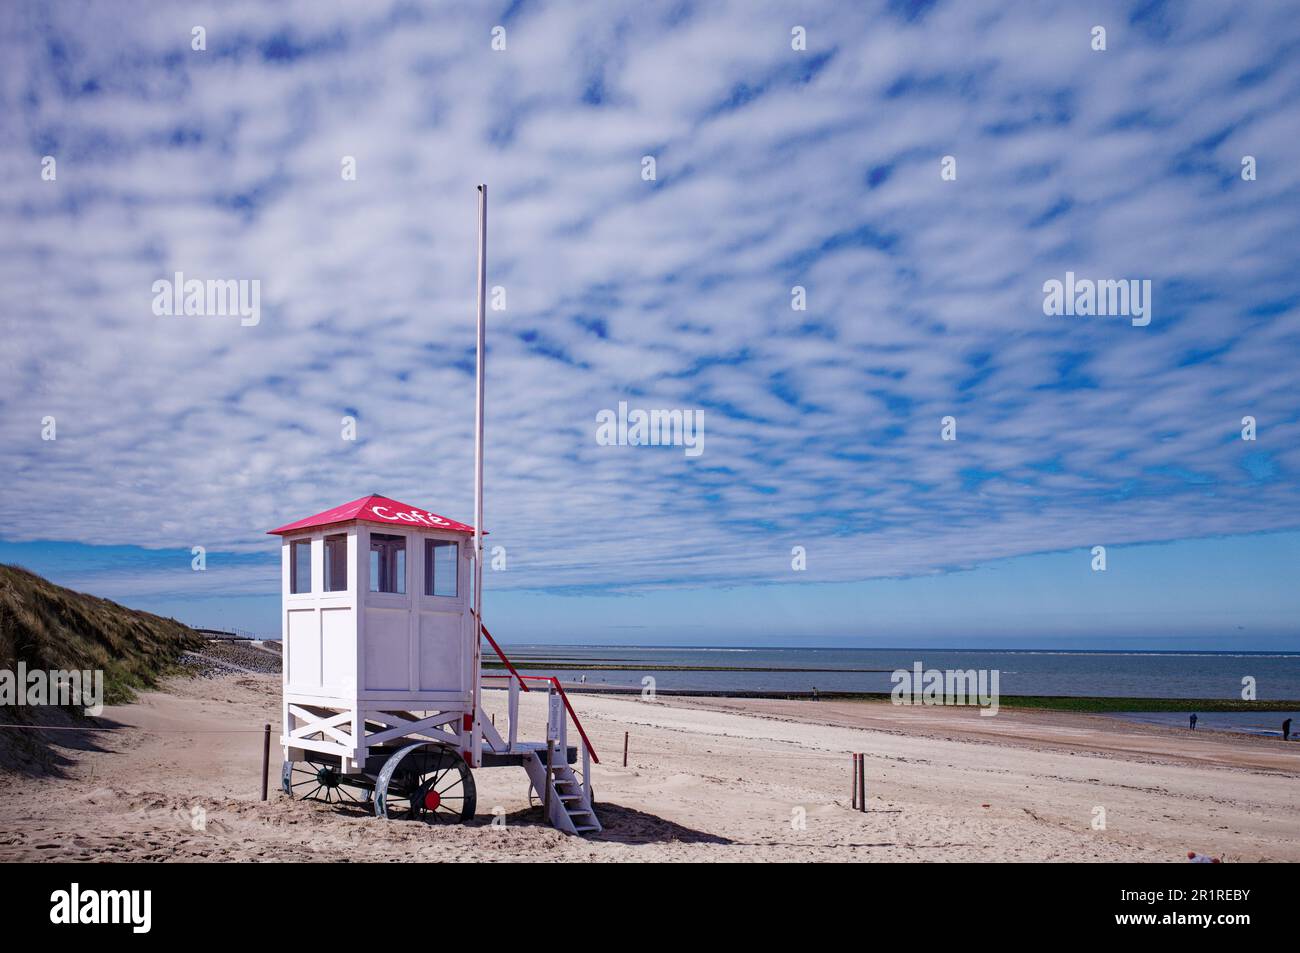 Cafe in a traditional bathing wagon on the beach, Baltrum, East Frisia, Lower Saxony, Germany Stock Photo